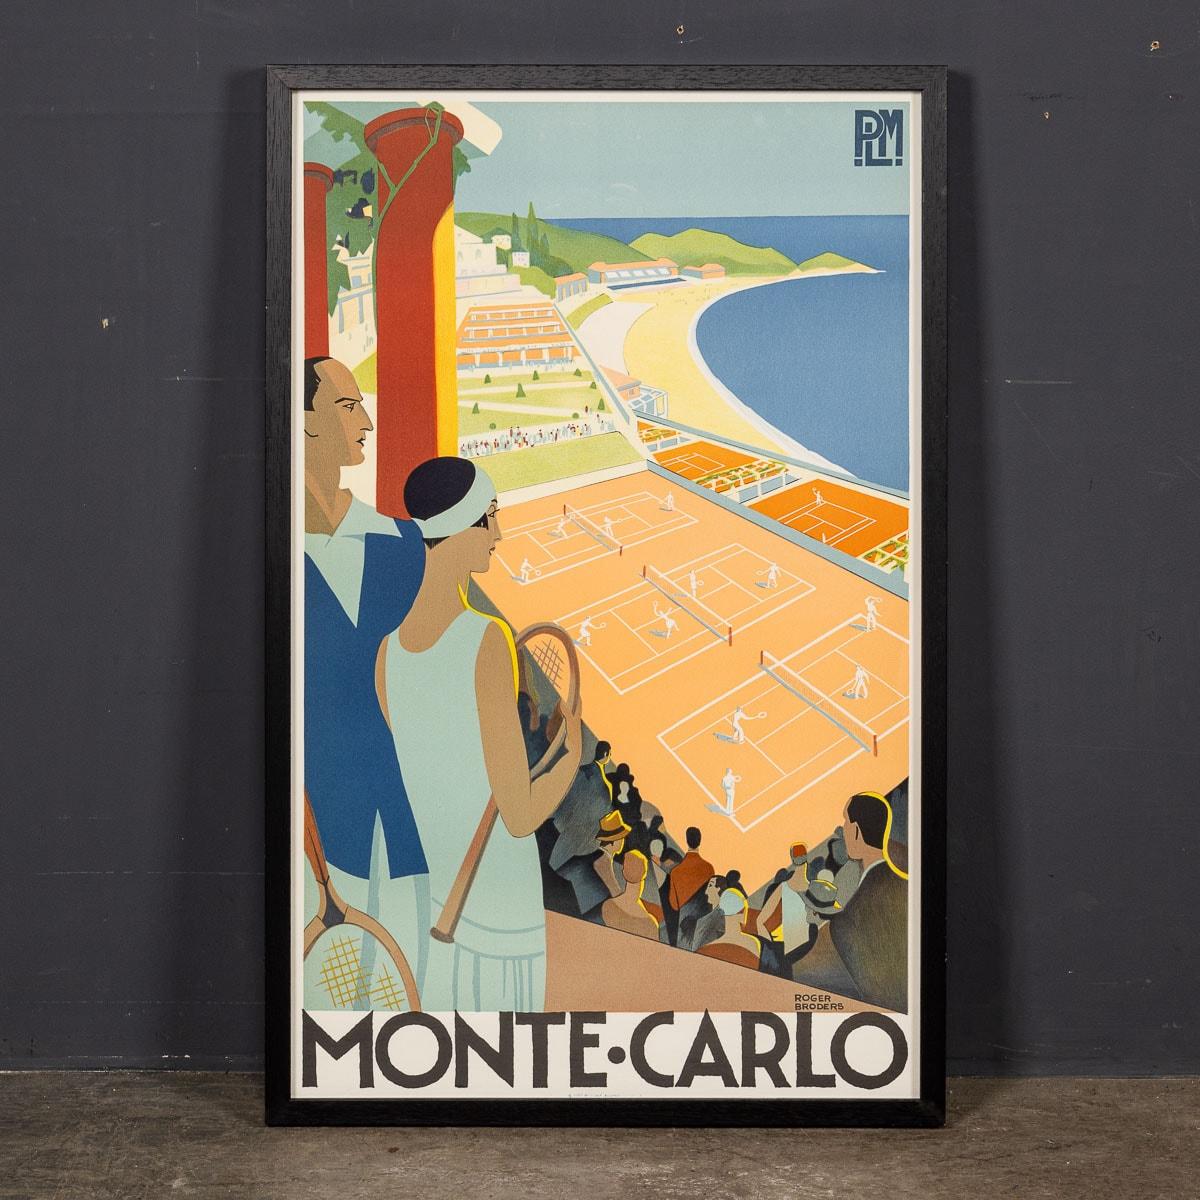 A reprint (1983) of the 1930 original travel poster for PLM railway services by Roger Broders. These posters were commissioned by the railway to promote the Mediterranean coastline. This print has been framed in a simple black wooden frame and is